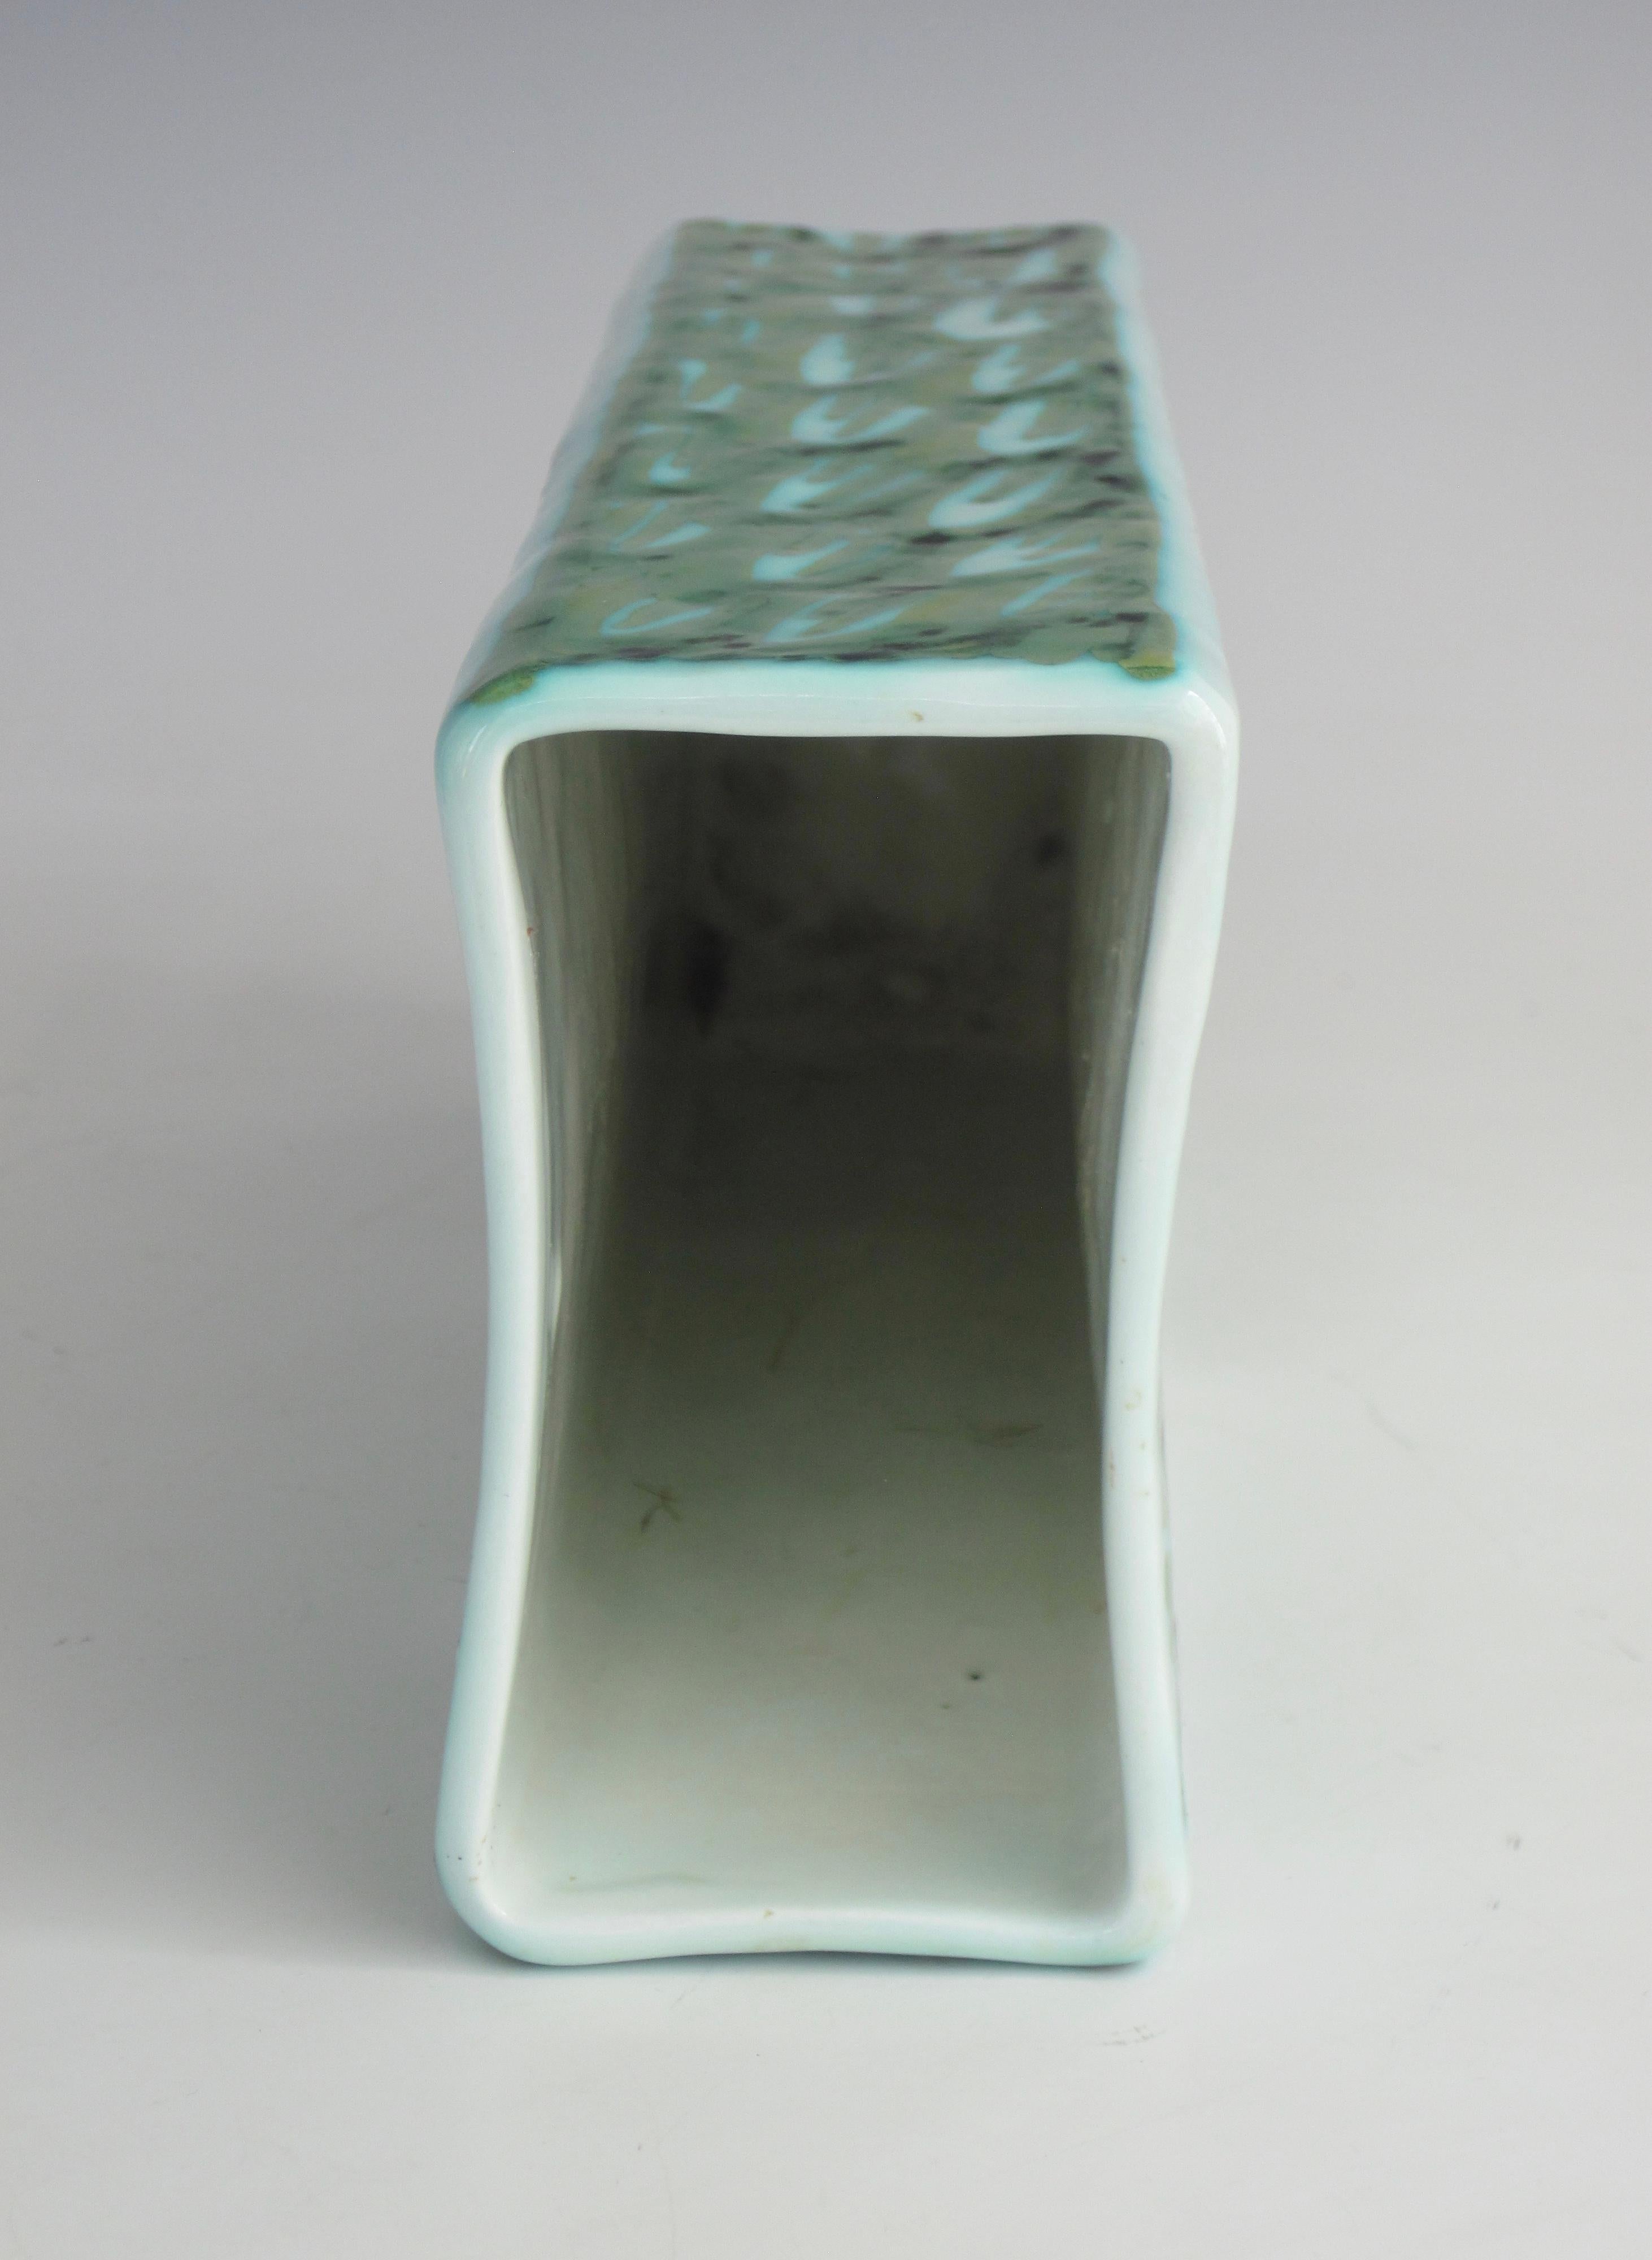 Alessio Tasca for Raymor Double Sided Rectangular Ceramic Vase For Sale 3